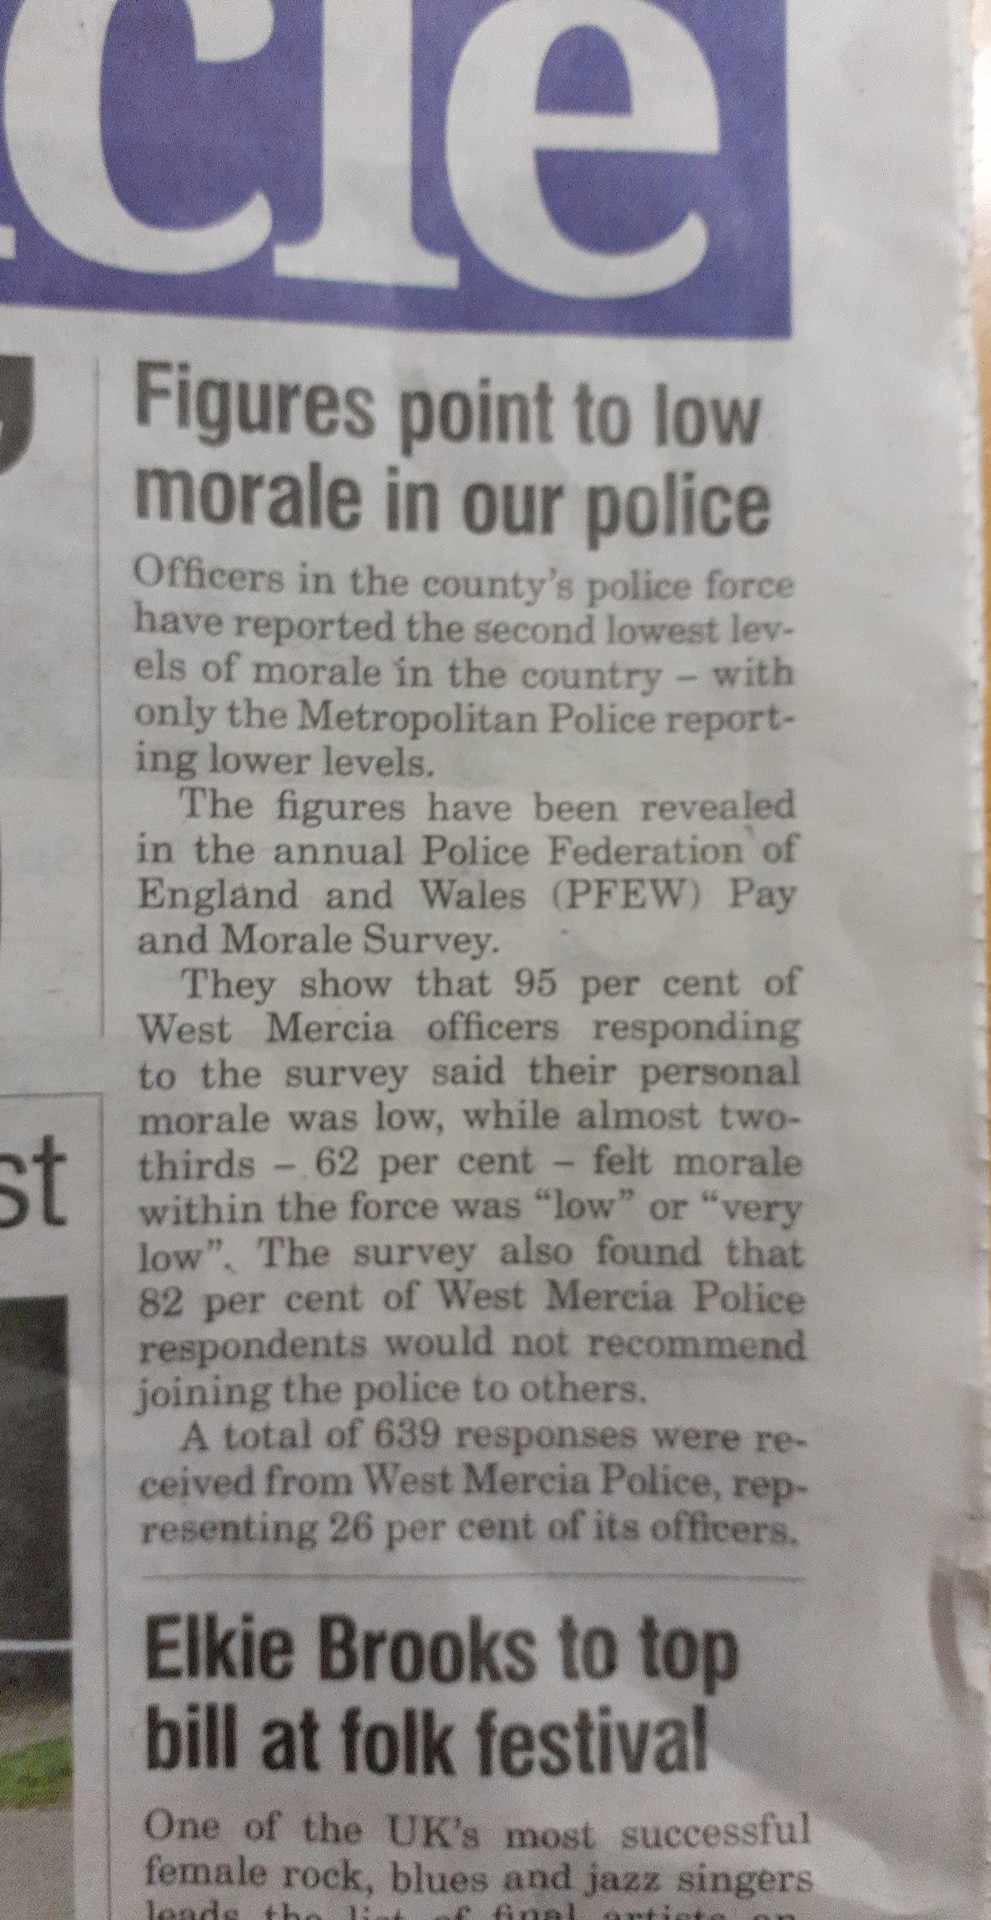 Why are so many officers leaving West Mercia Police?